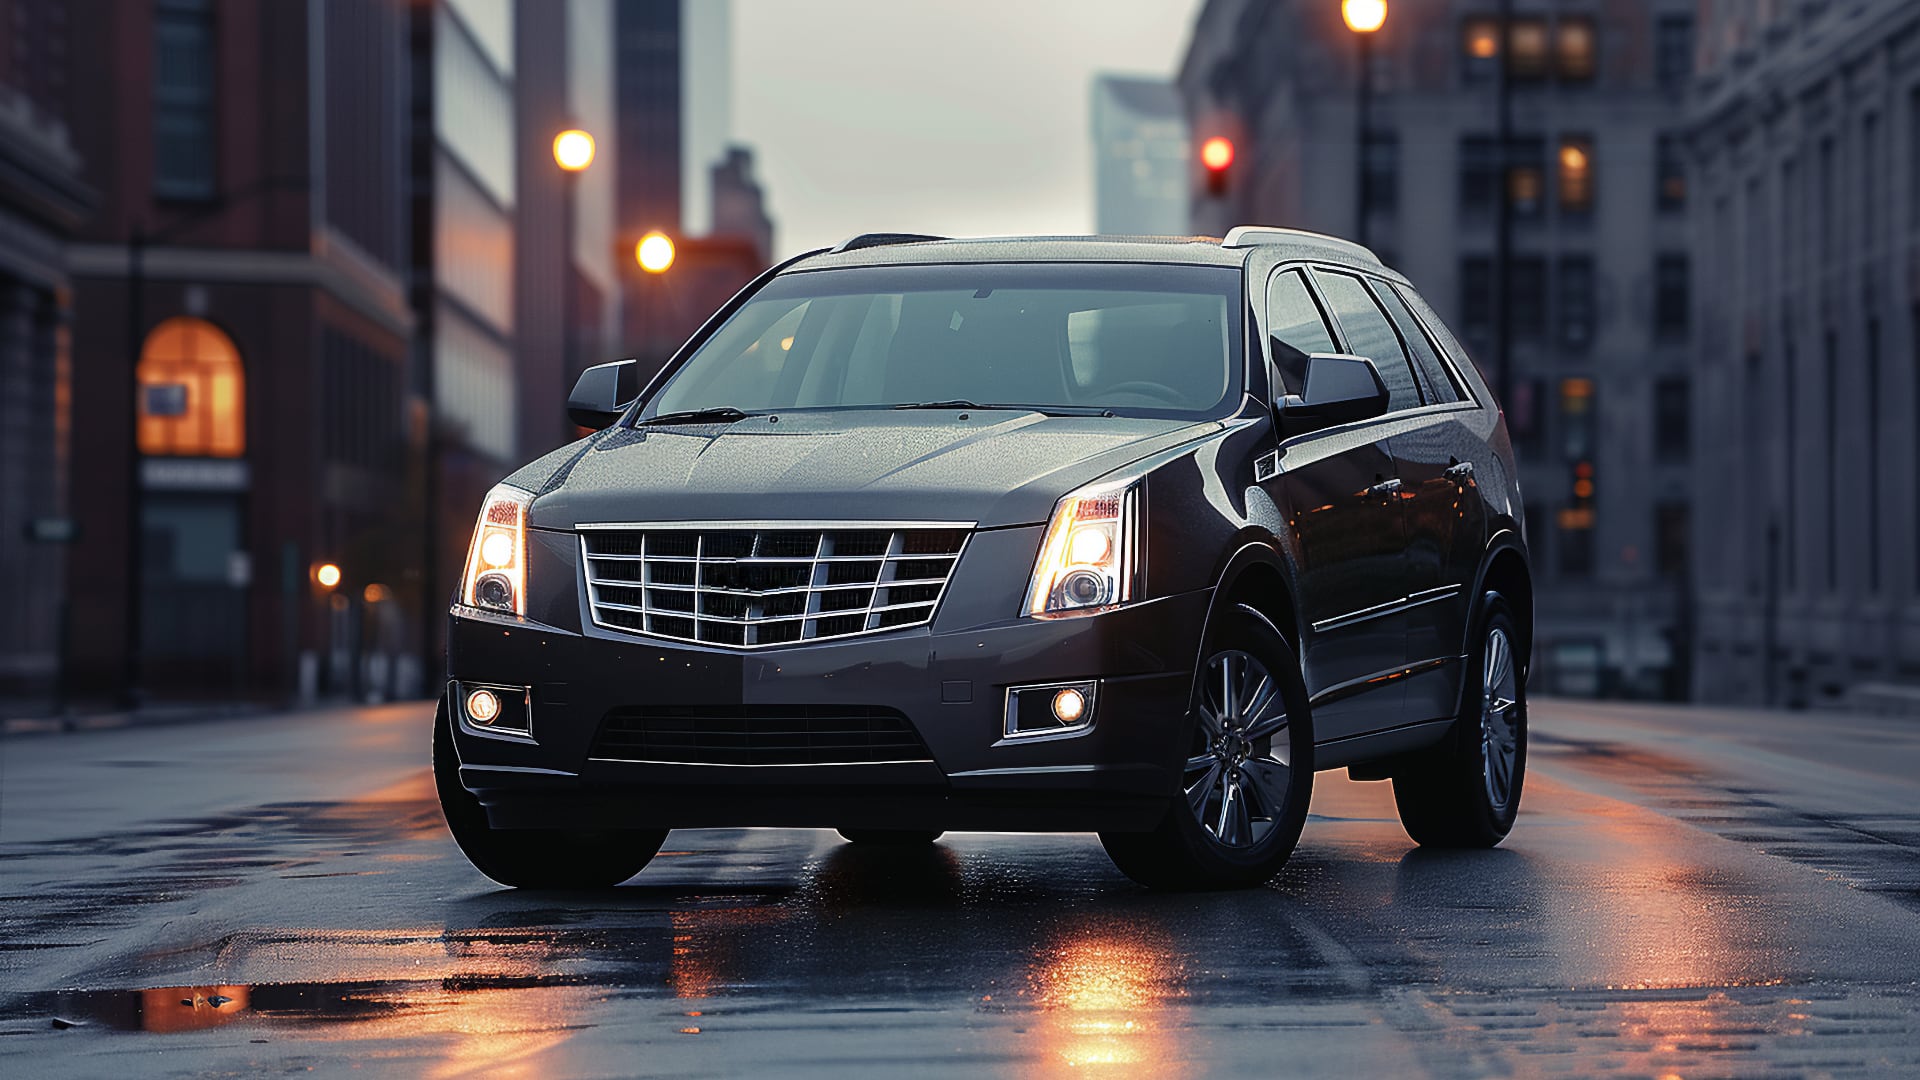 The Cadillac Escalade is cruising through the city streets at night.